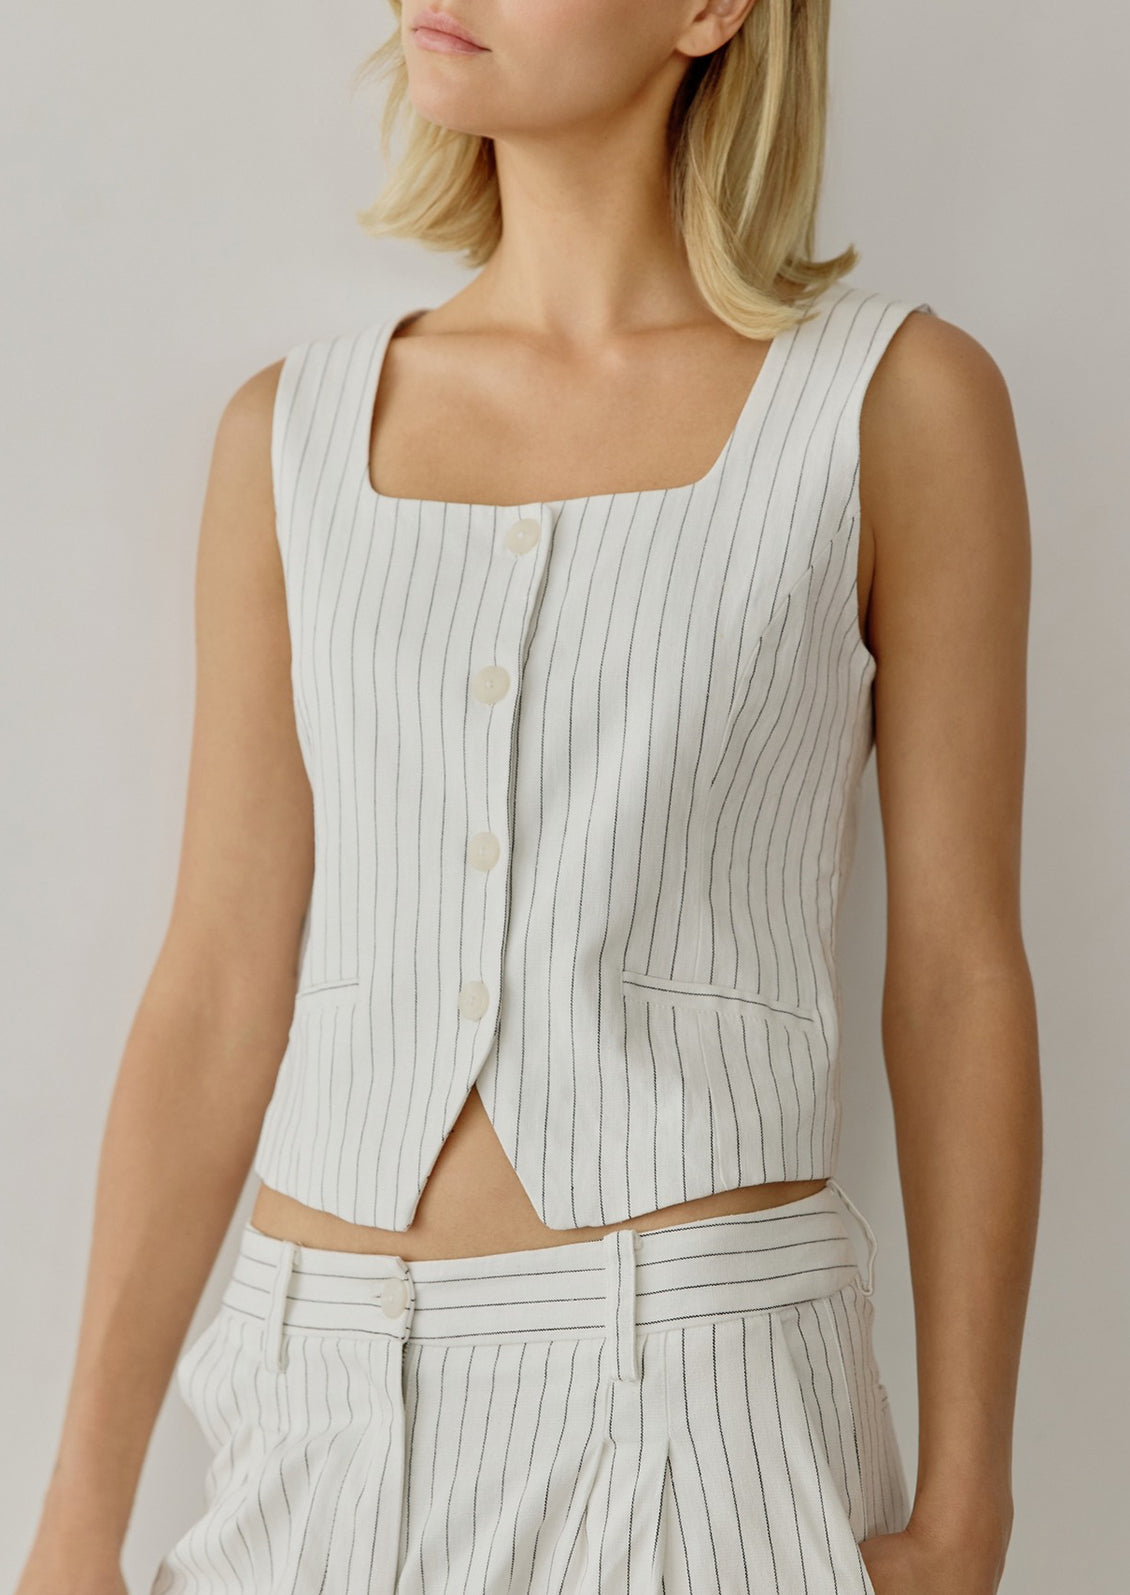 A woman wearing a white baseball style vest with black pinstripe.